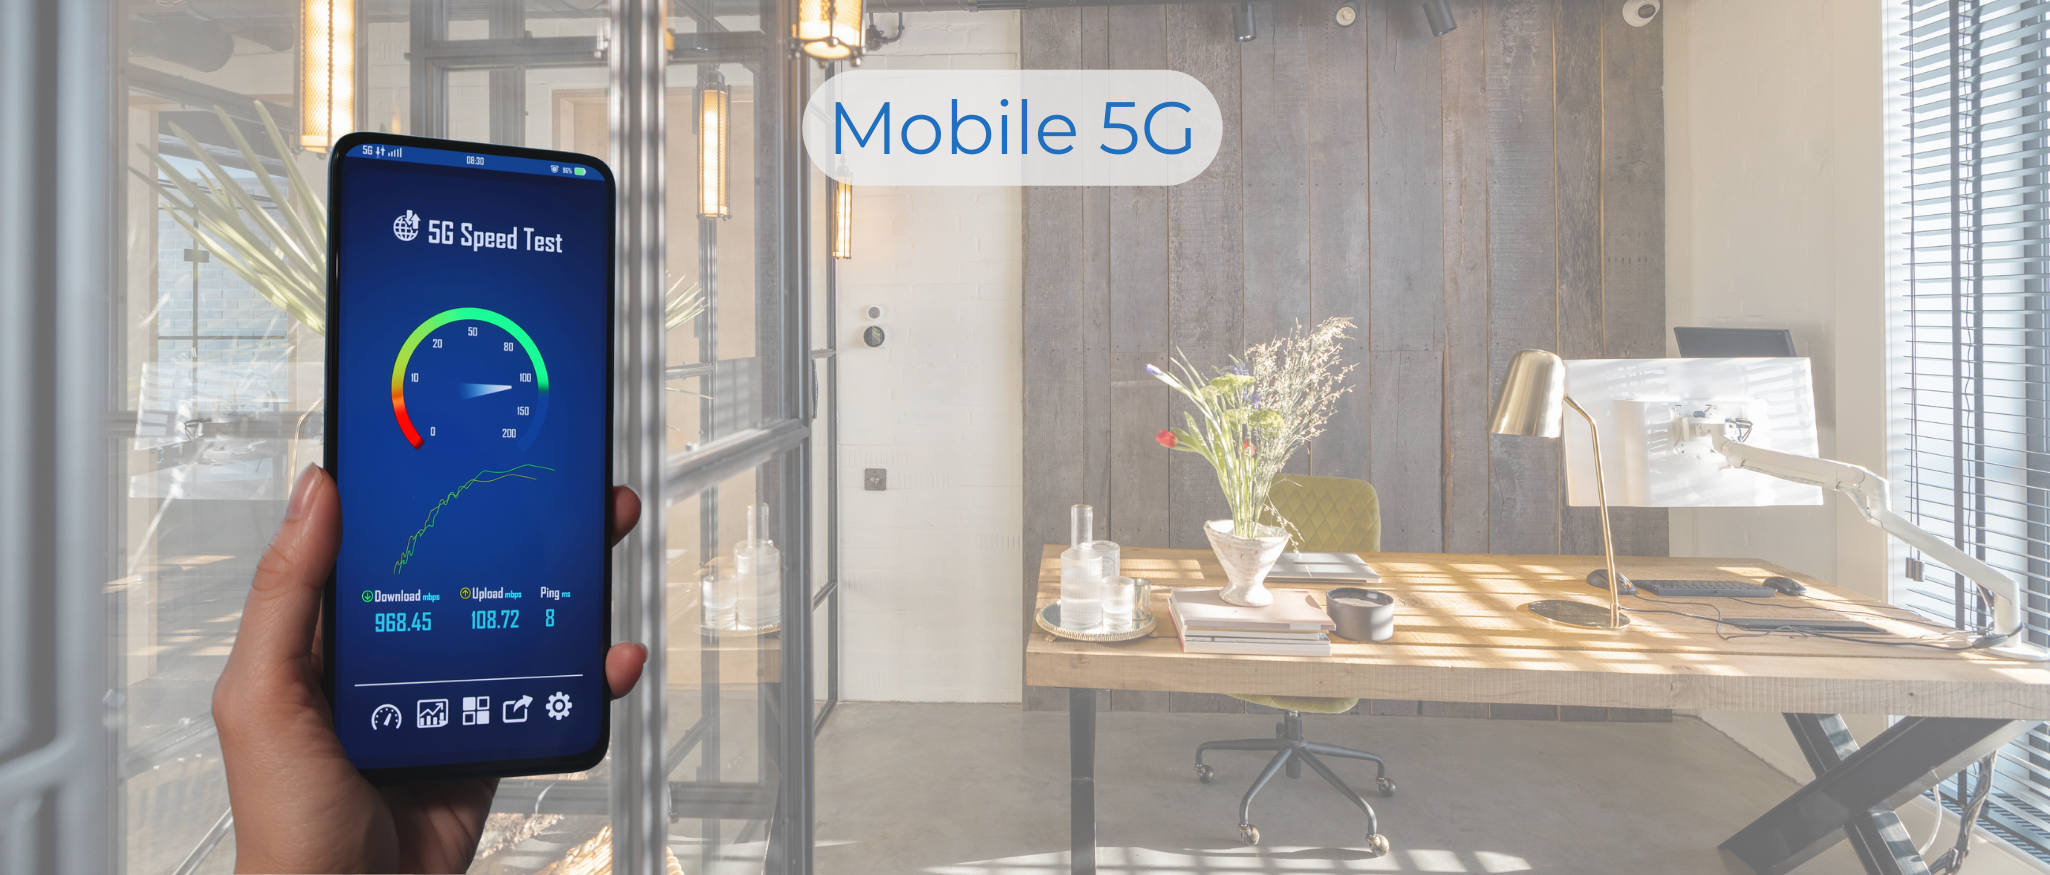 Mobile 5G cover image